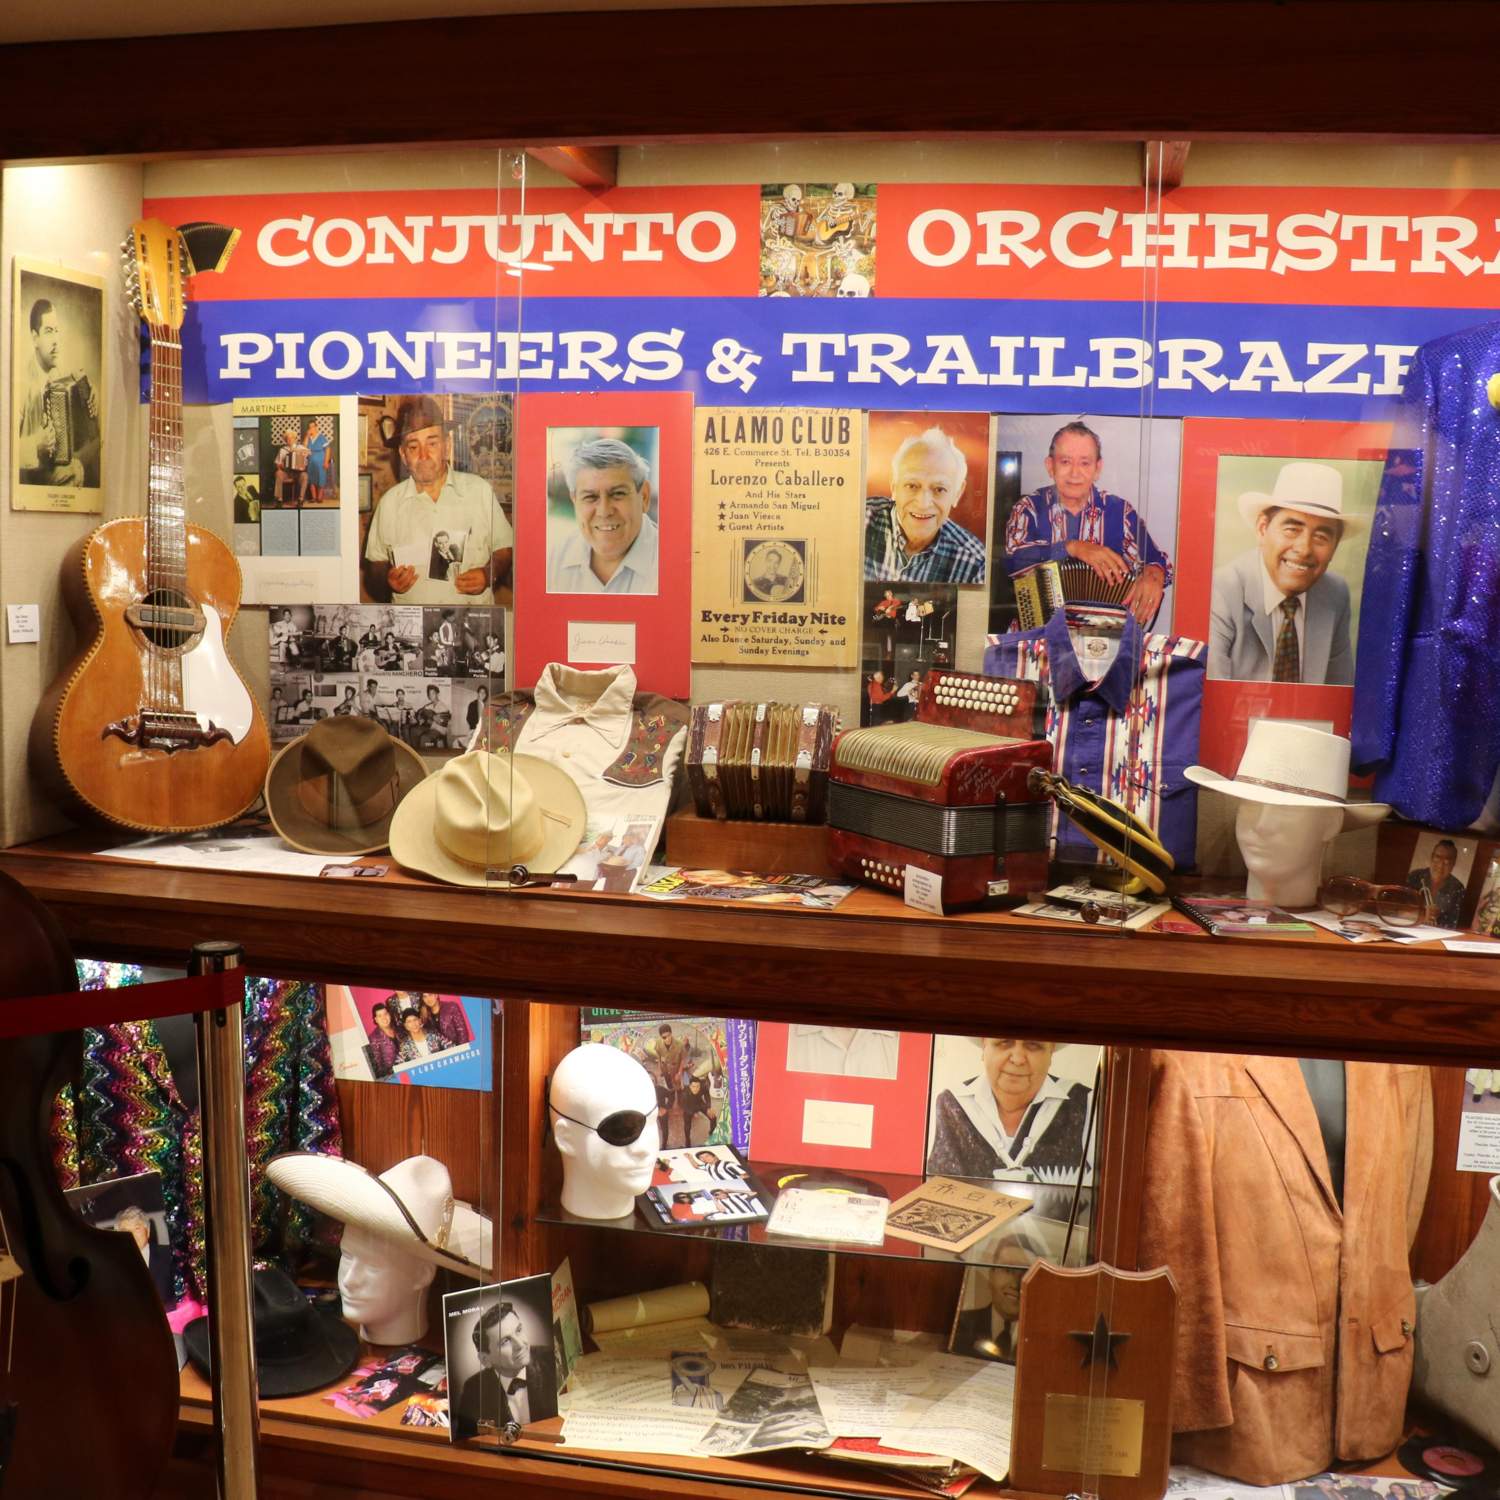 Photo of display case titled "Conjunto and Orchestra Pioneers and Trailblazers"